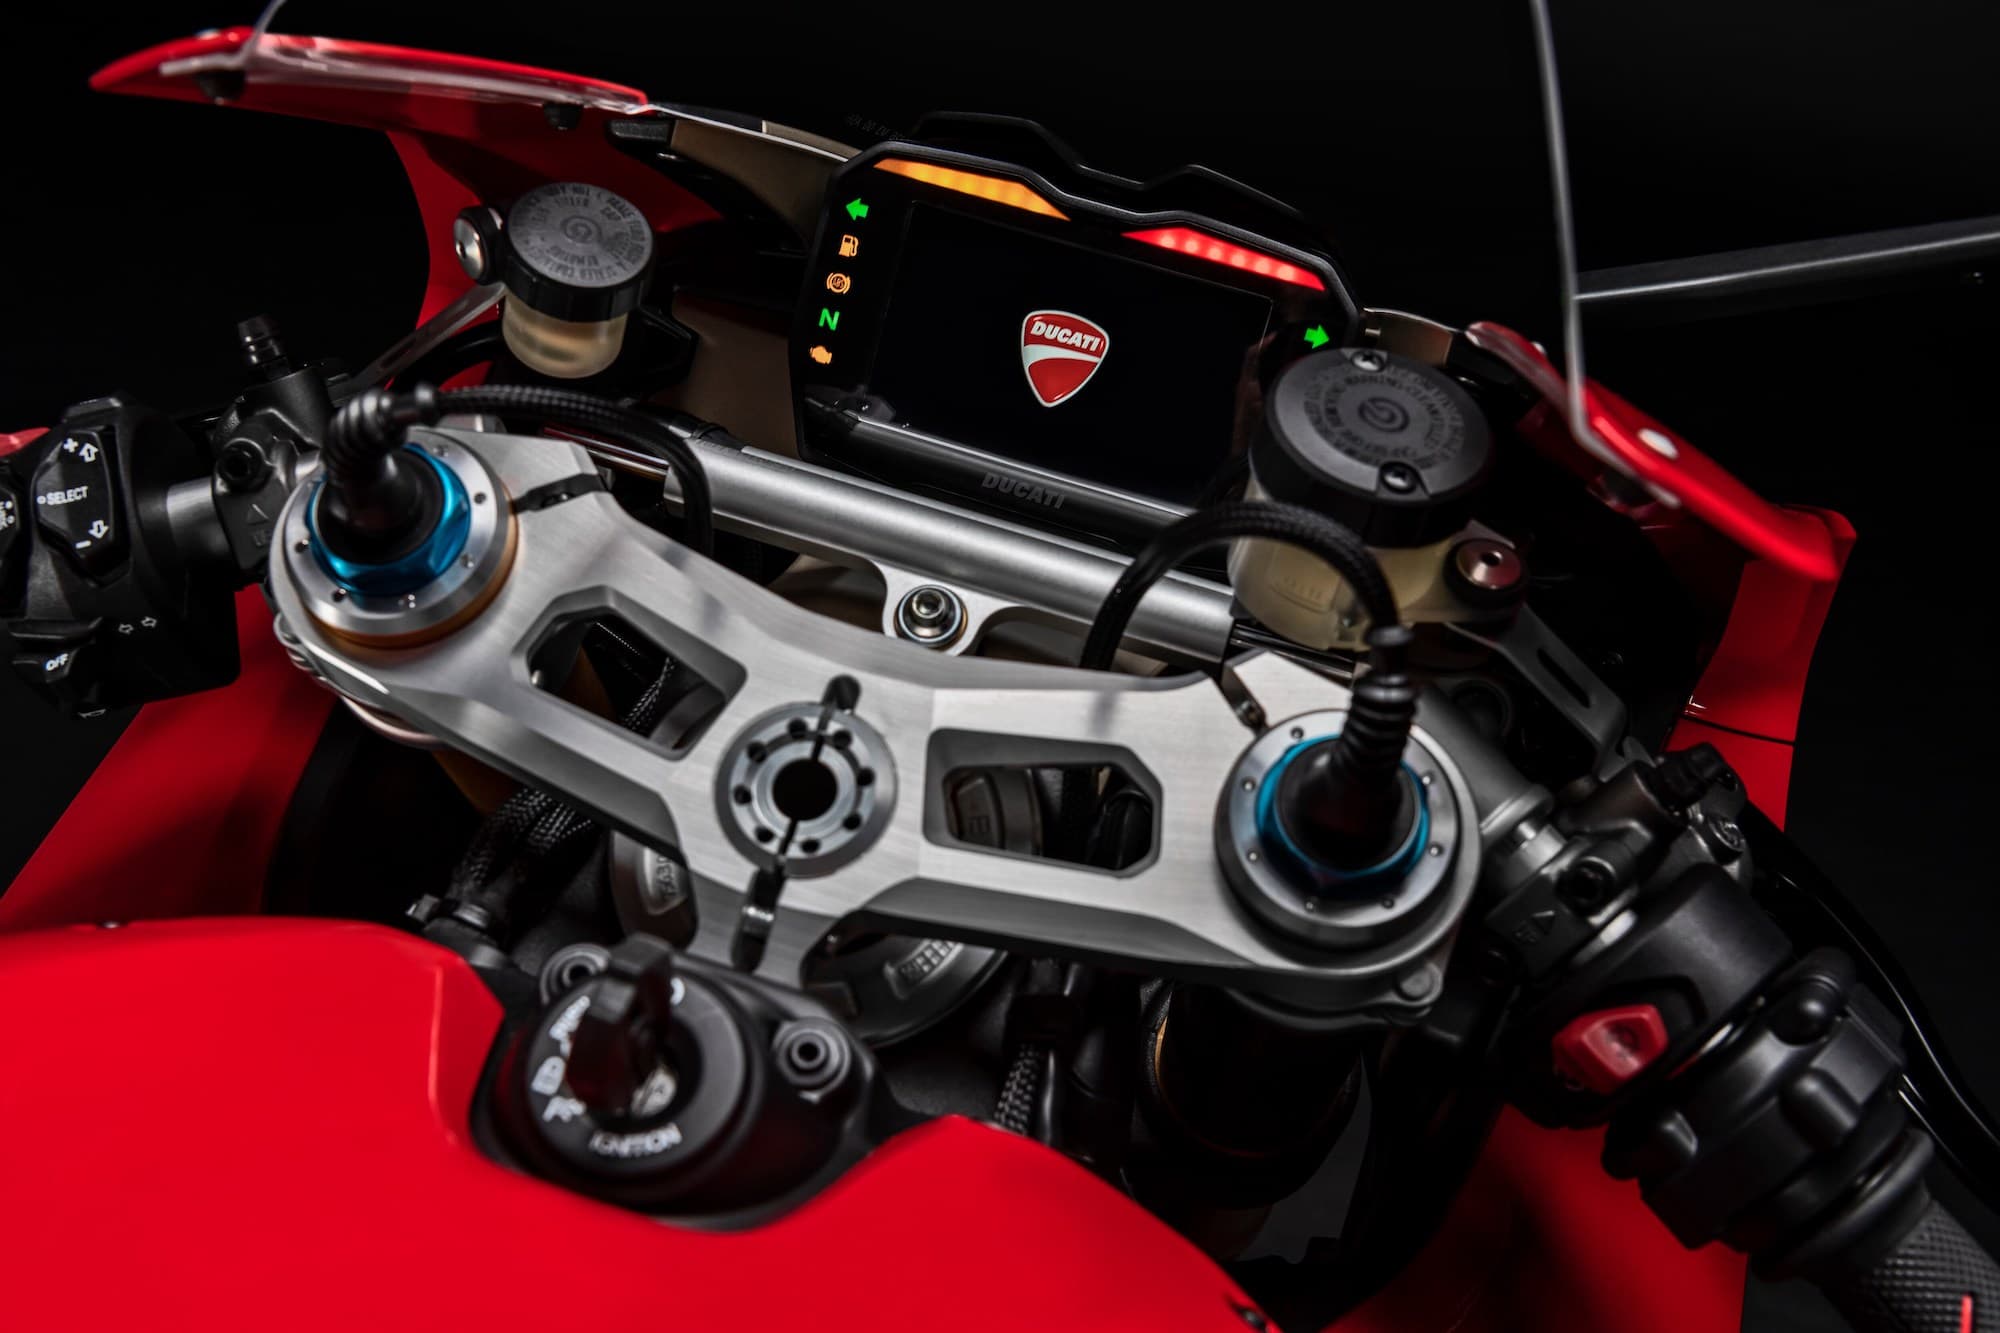 Ducati Panigale V4 S studio instruments and cluster